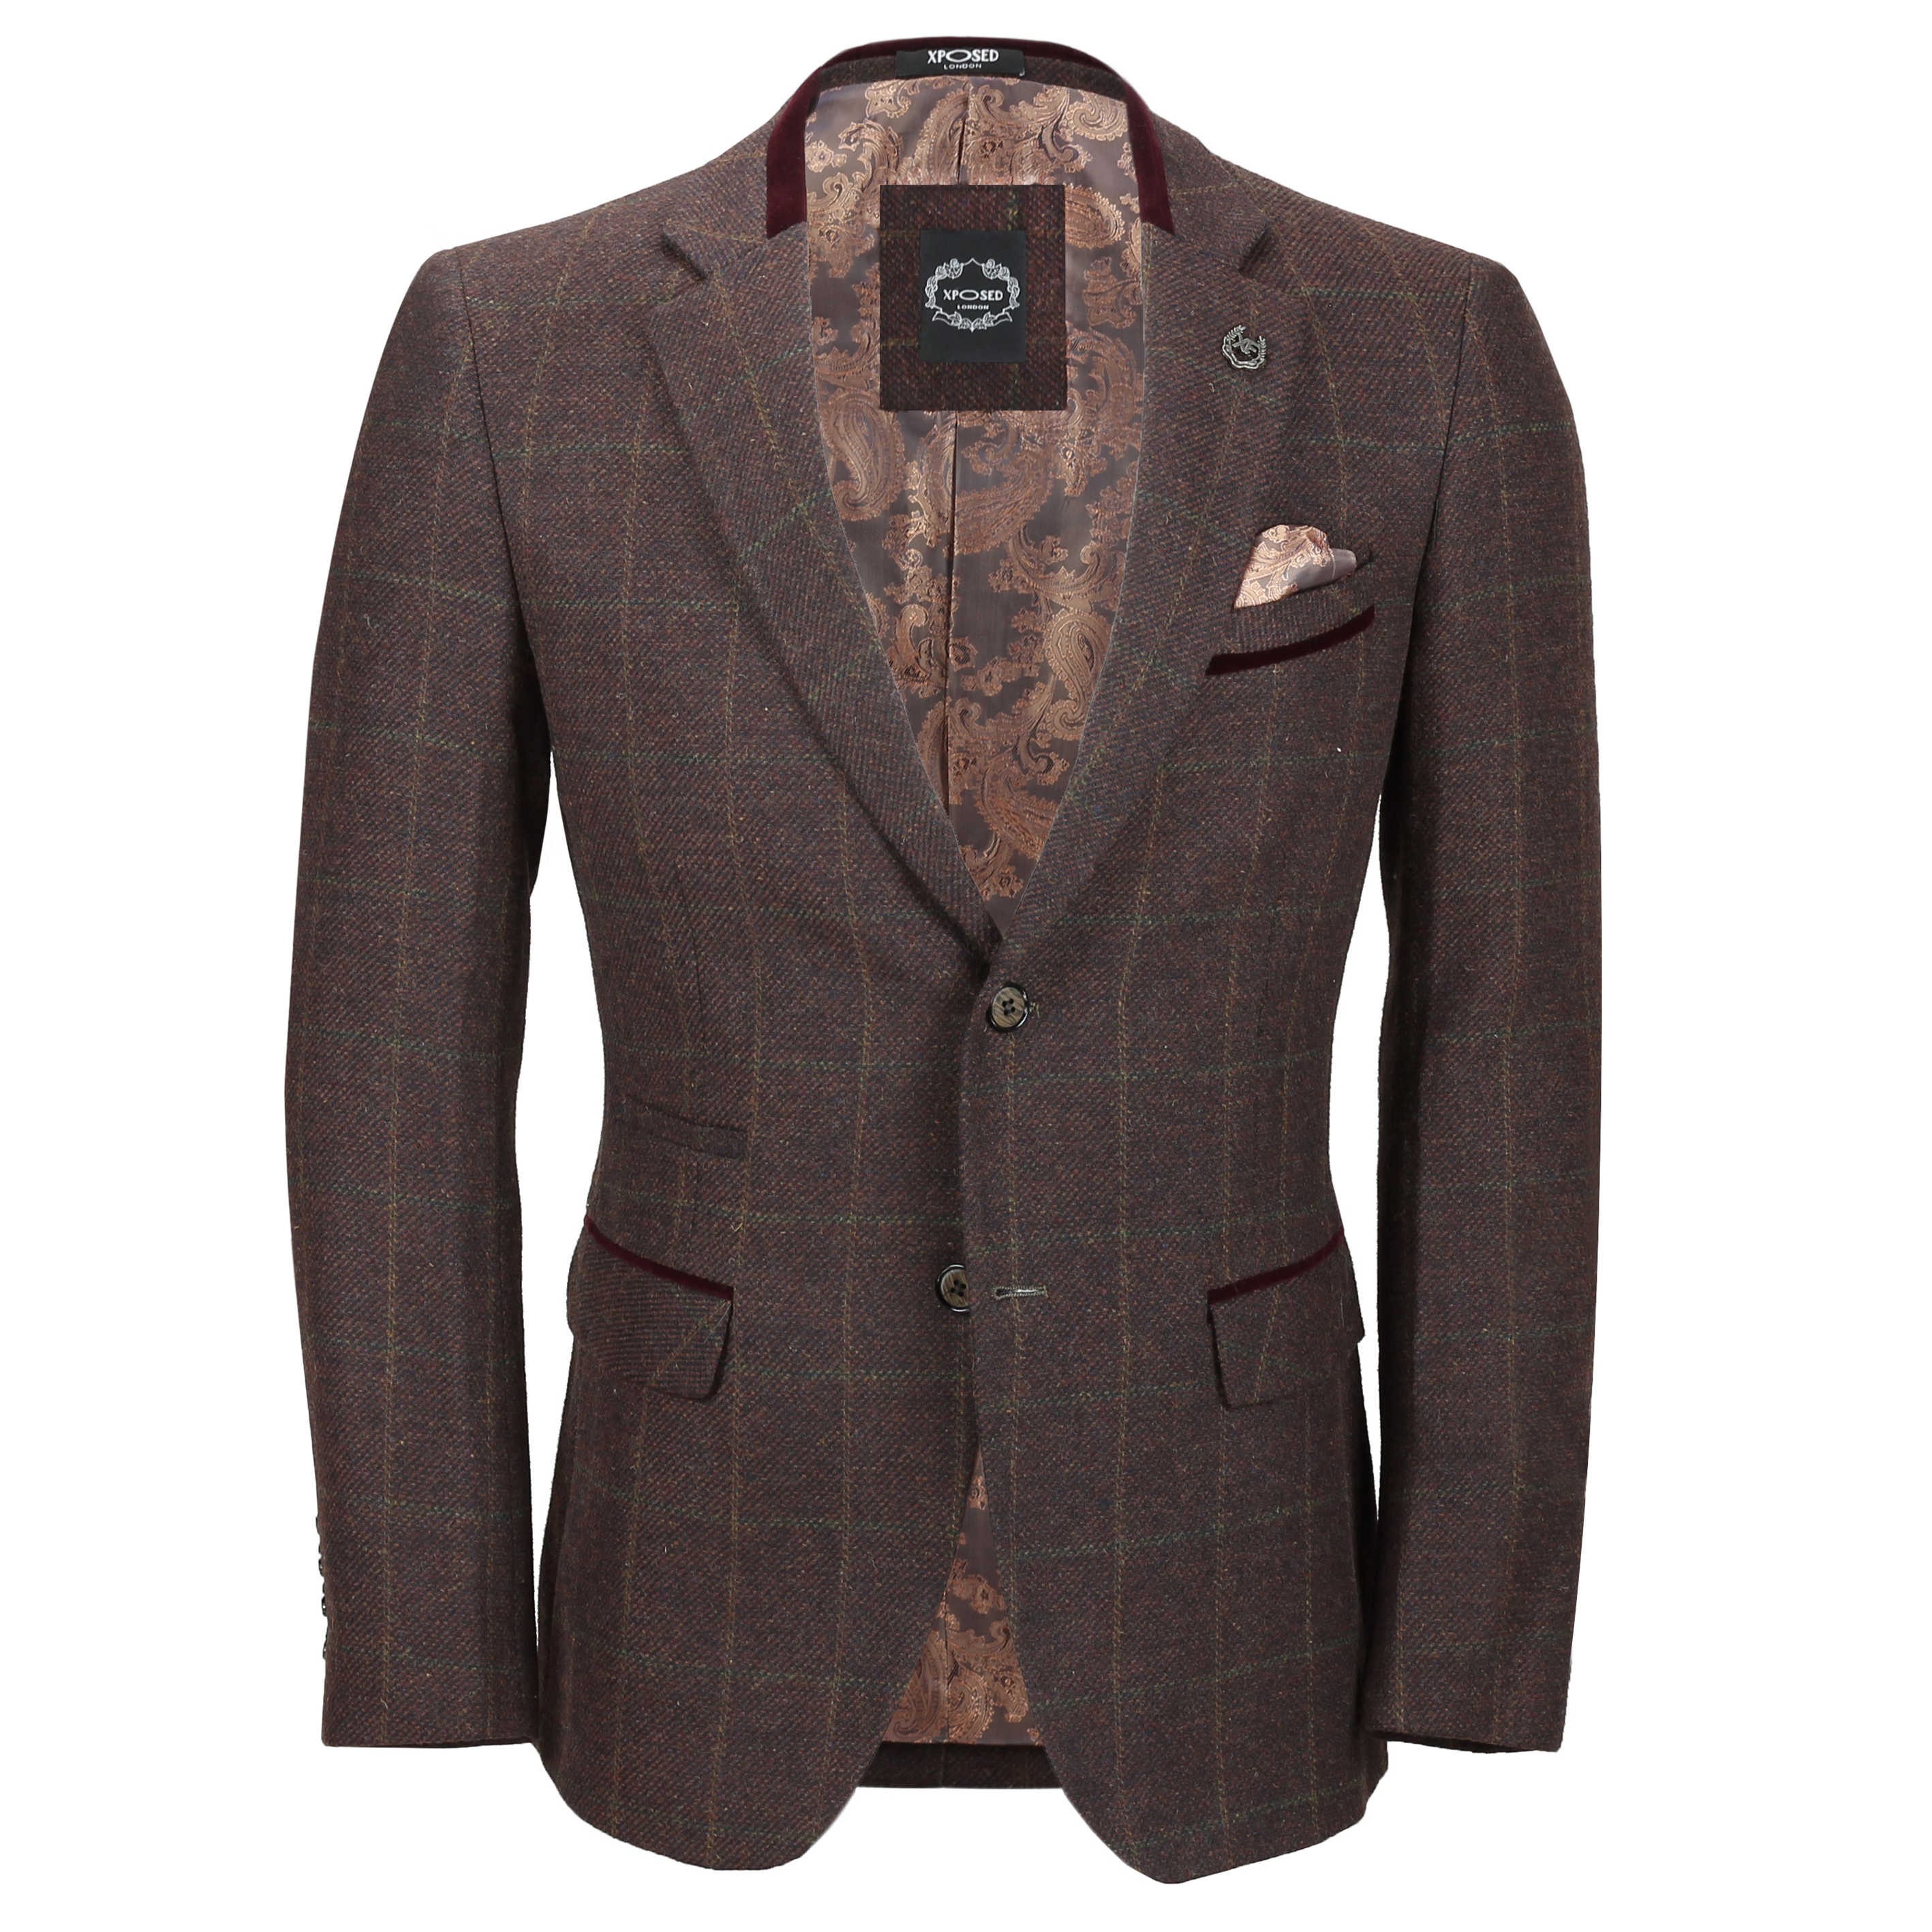 Mens Casual Tweed Check Blazer Slim Fit Suit Jacket Business Plaid Blazer Jacket Checked Dinner Suits Coats